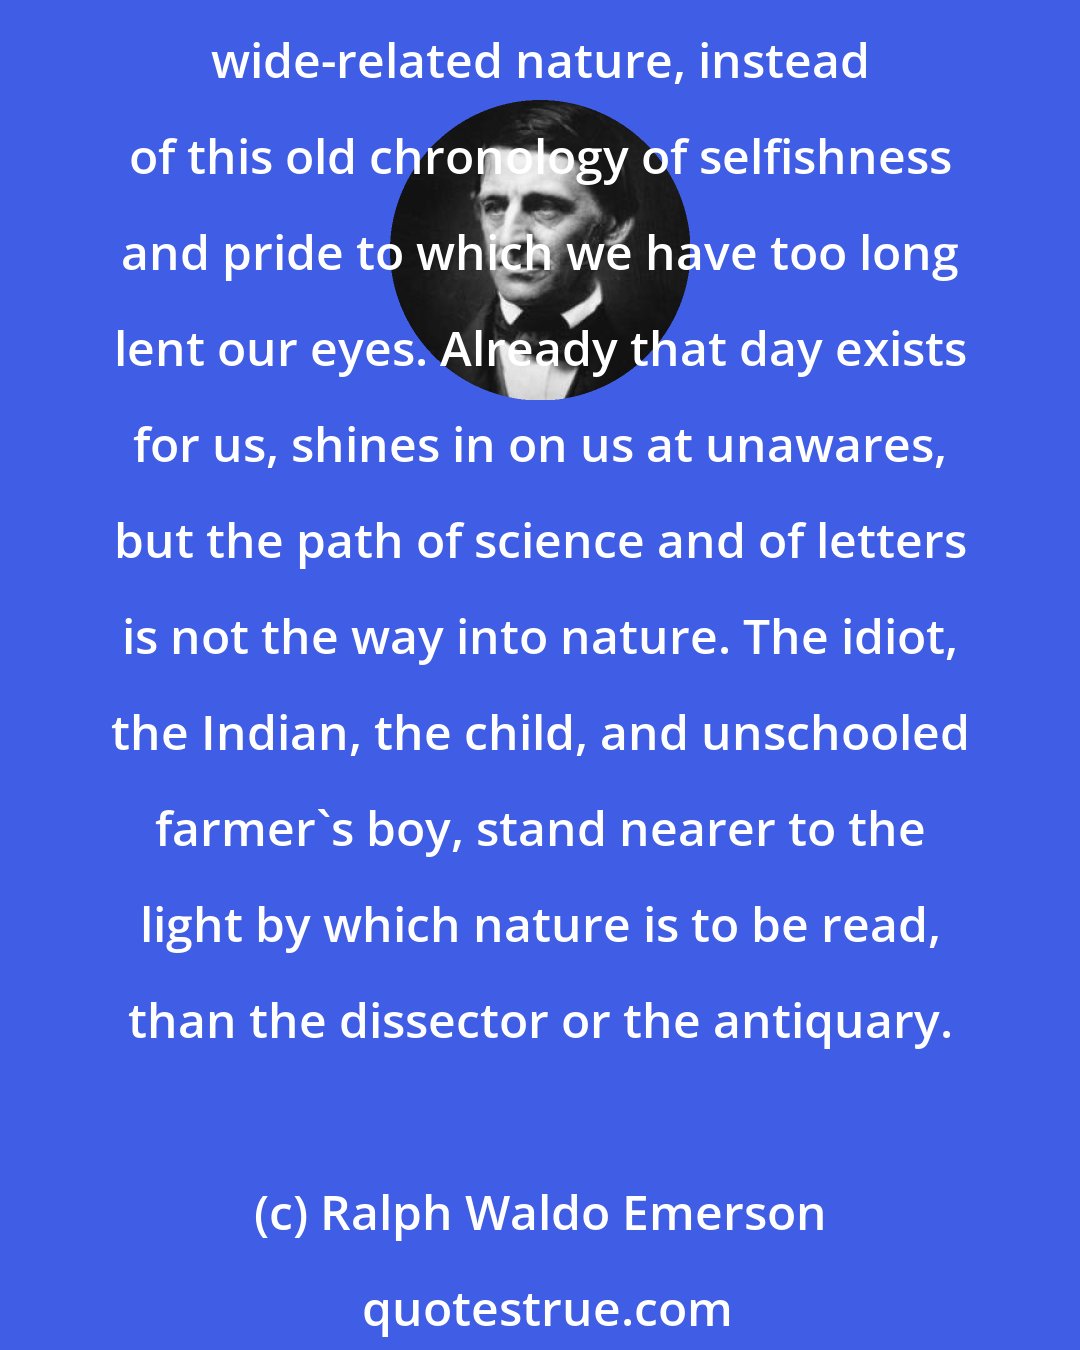 Ralph Waldo Emerson: Broader and deeper we must write our annals, from an ethical reformation, from an influx of the ever new, ever sanative conscience, if we would trulier express our central and wide-related nature, instead of this old chronology of selfishness and pride to which we have too long lent our eyes. Already that day exists for us, shines in on us at unawares, but the path of science and of letters is not the way into nature. The idiot, the Indian, the child, and unschooled farmer's boy, stand nearer to the light by which nature is to be read, than the dissector or the antiquary.